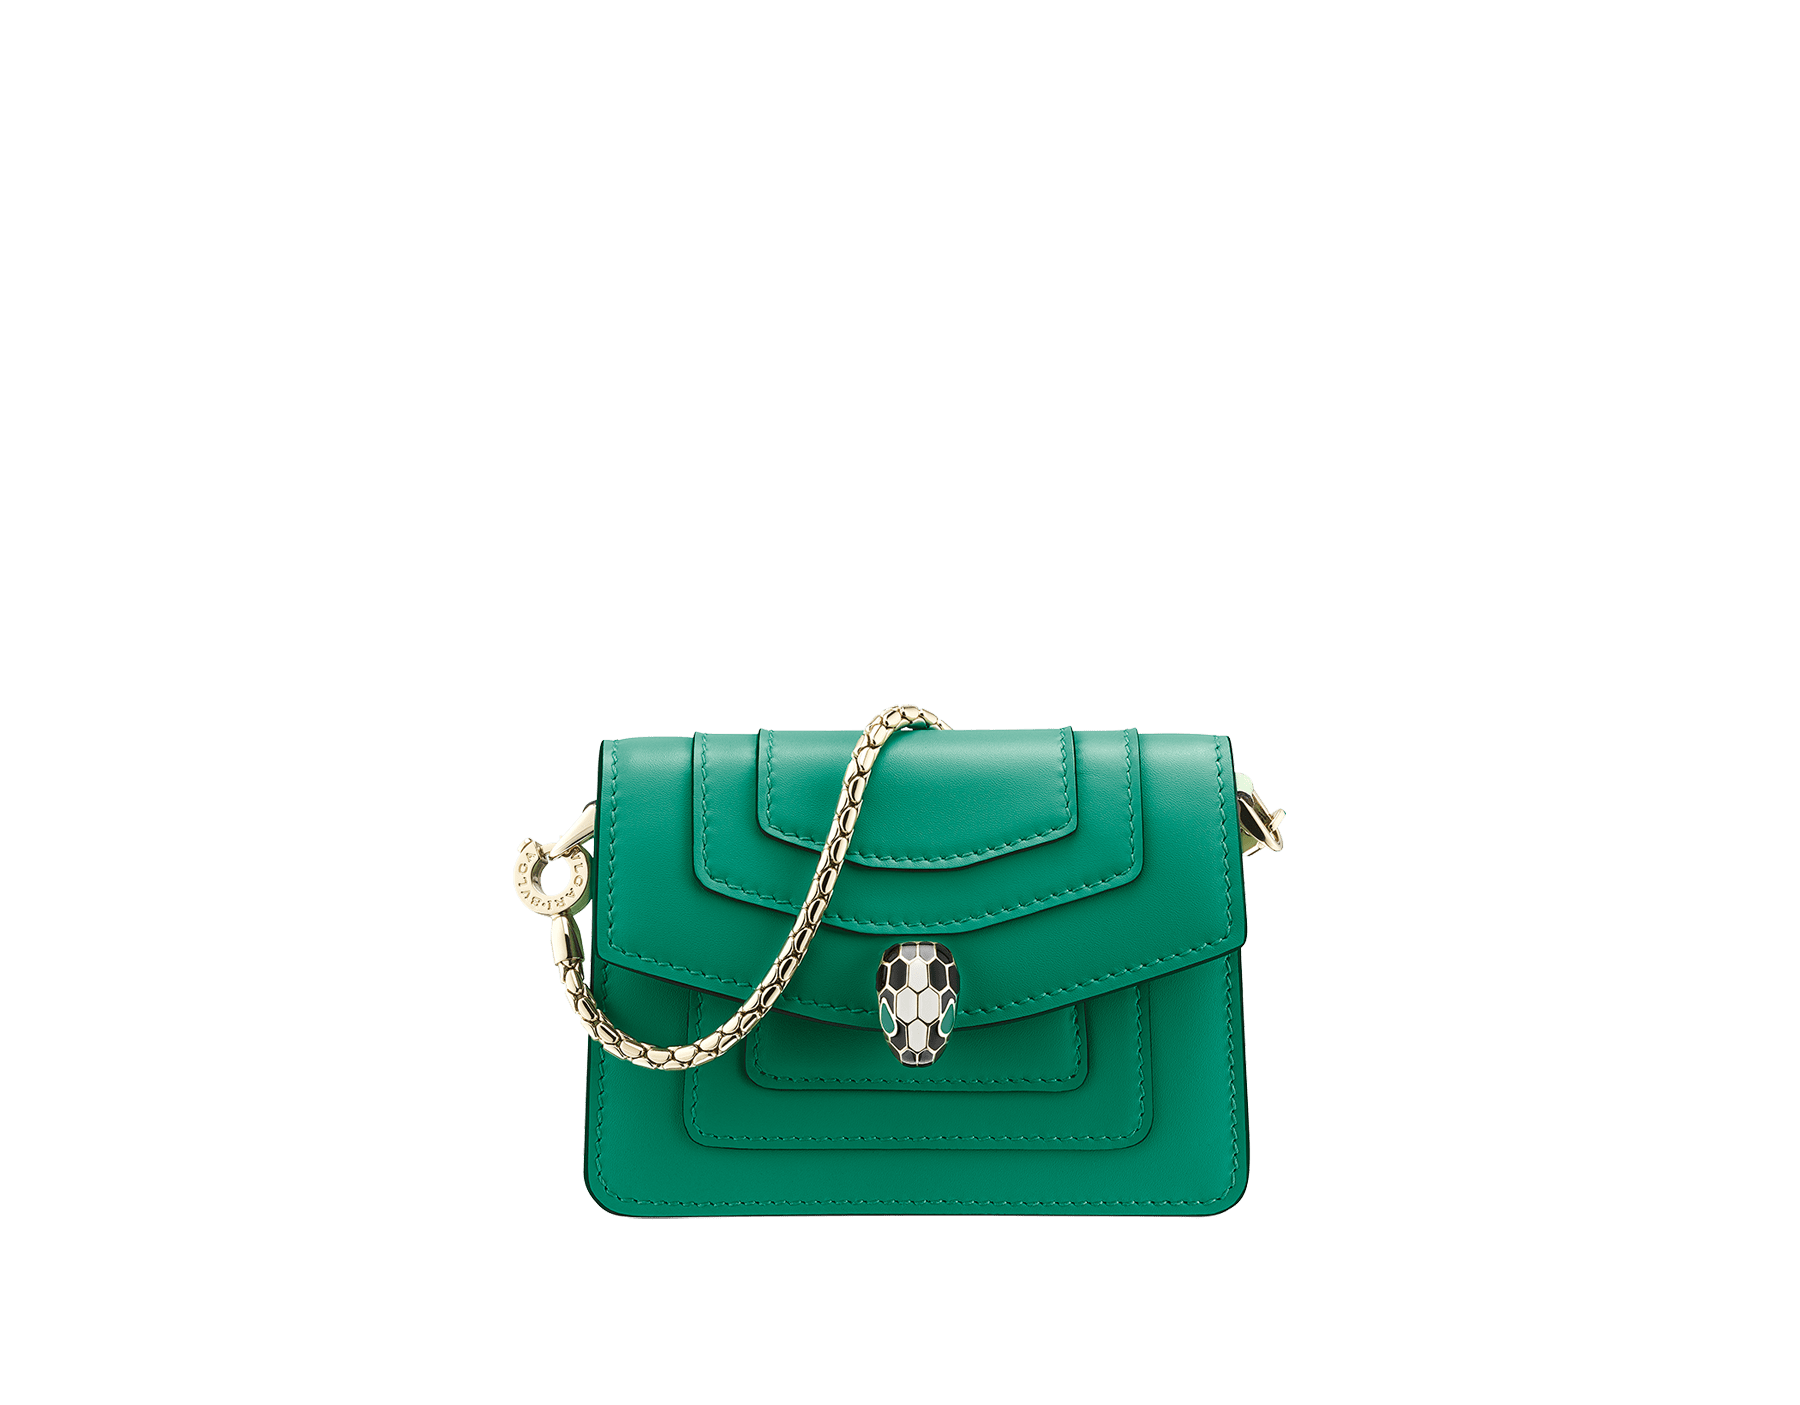 Bag charm Serpenti Forever miniature in emerald green calf leather with violet amethyst calf leather lining. 283244 image 1